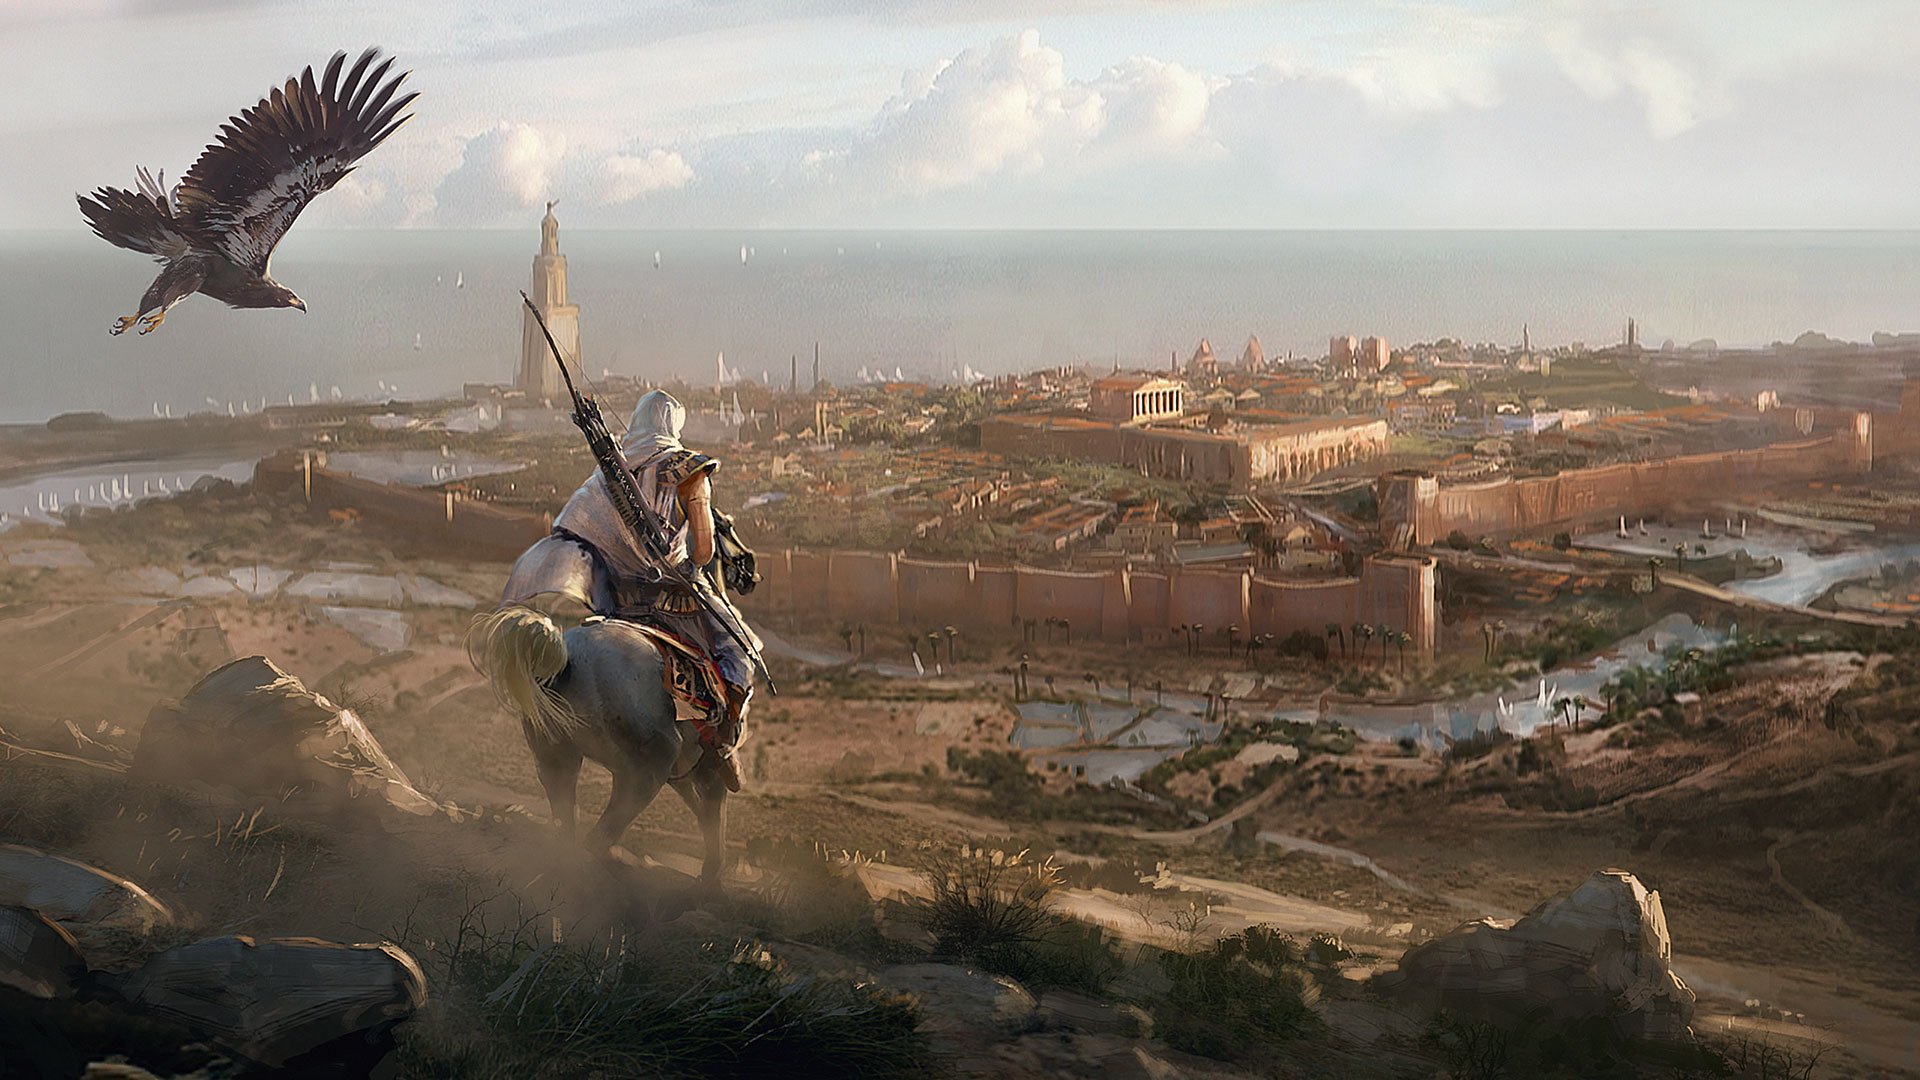 Assassin's Creed Mirage launch set for 2023: Features, trailer, new details  and more